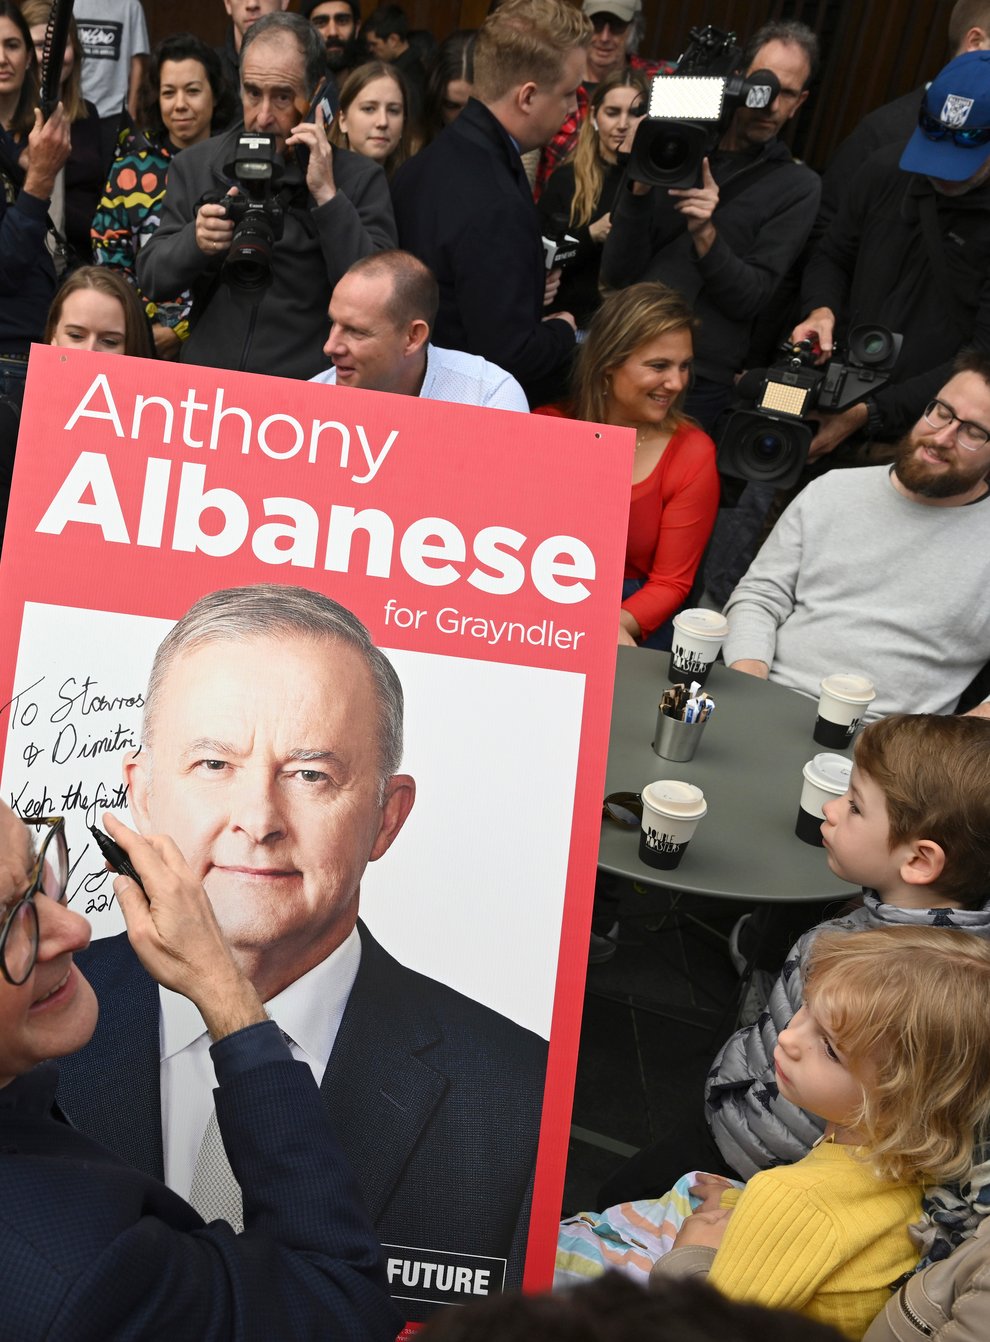 Anthony Albanese vowed to bring Australians together (Dean Lewins/AAP Image via AP)